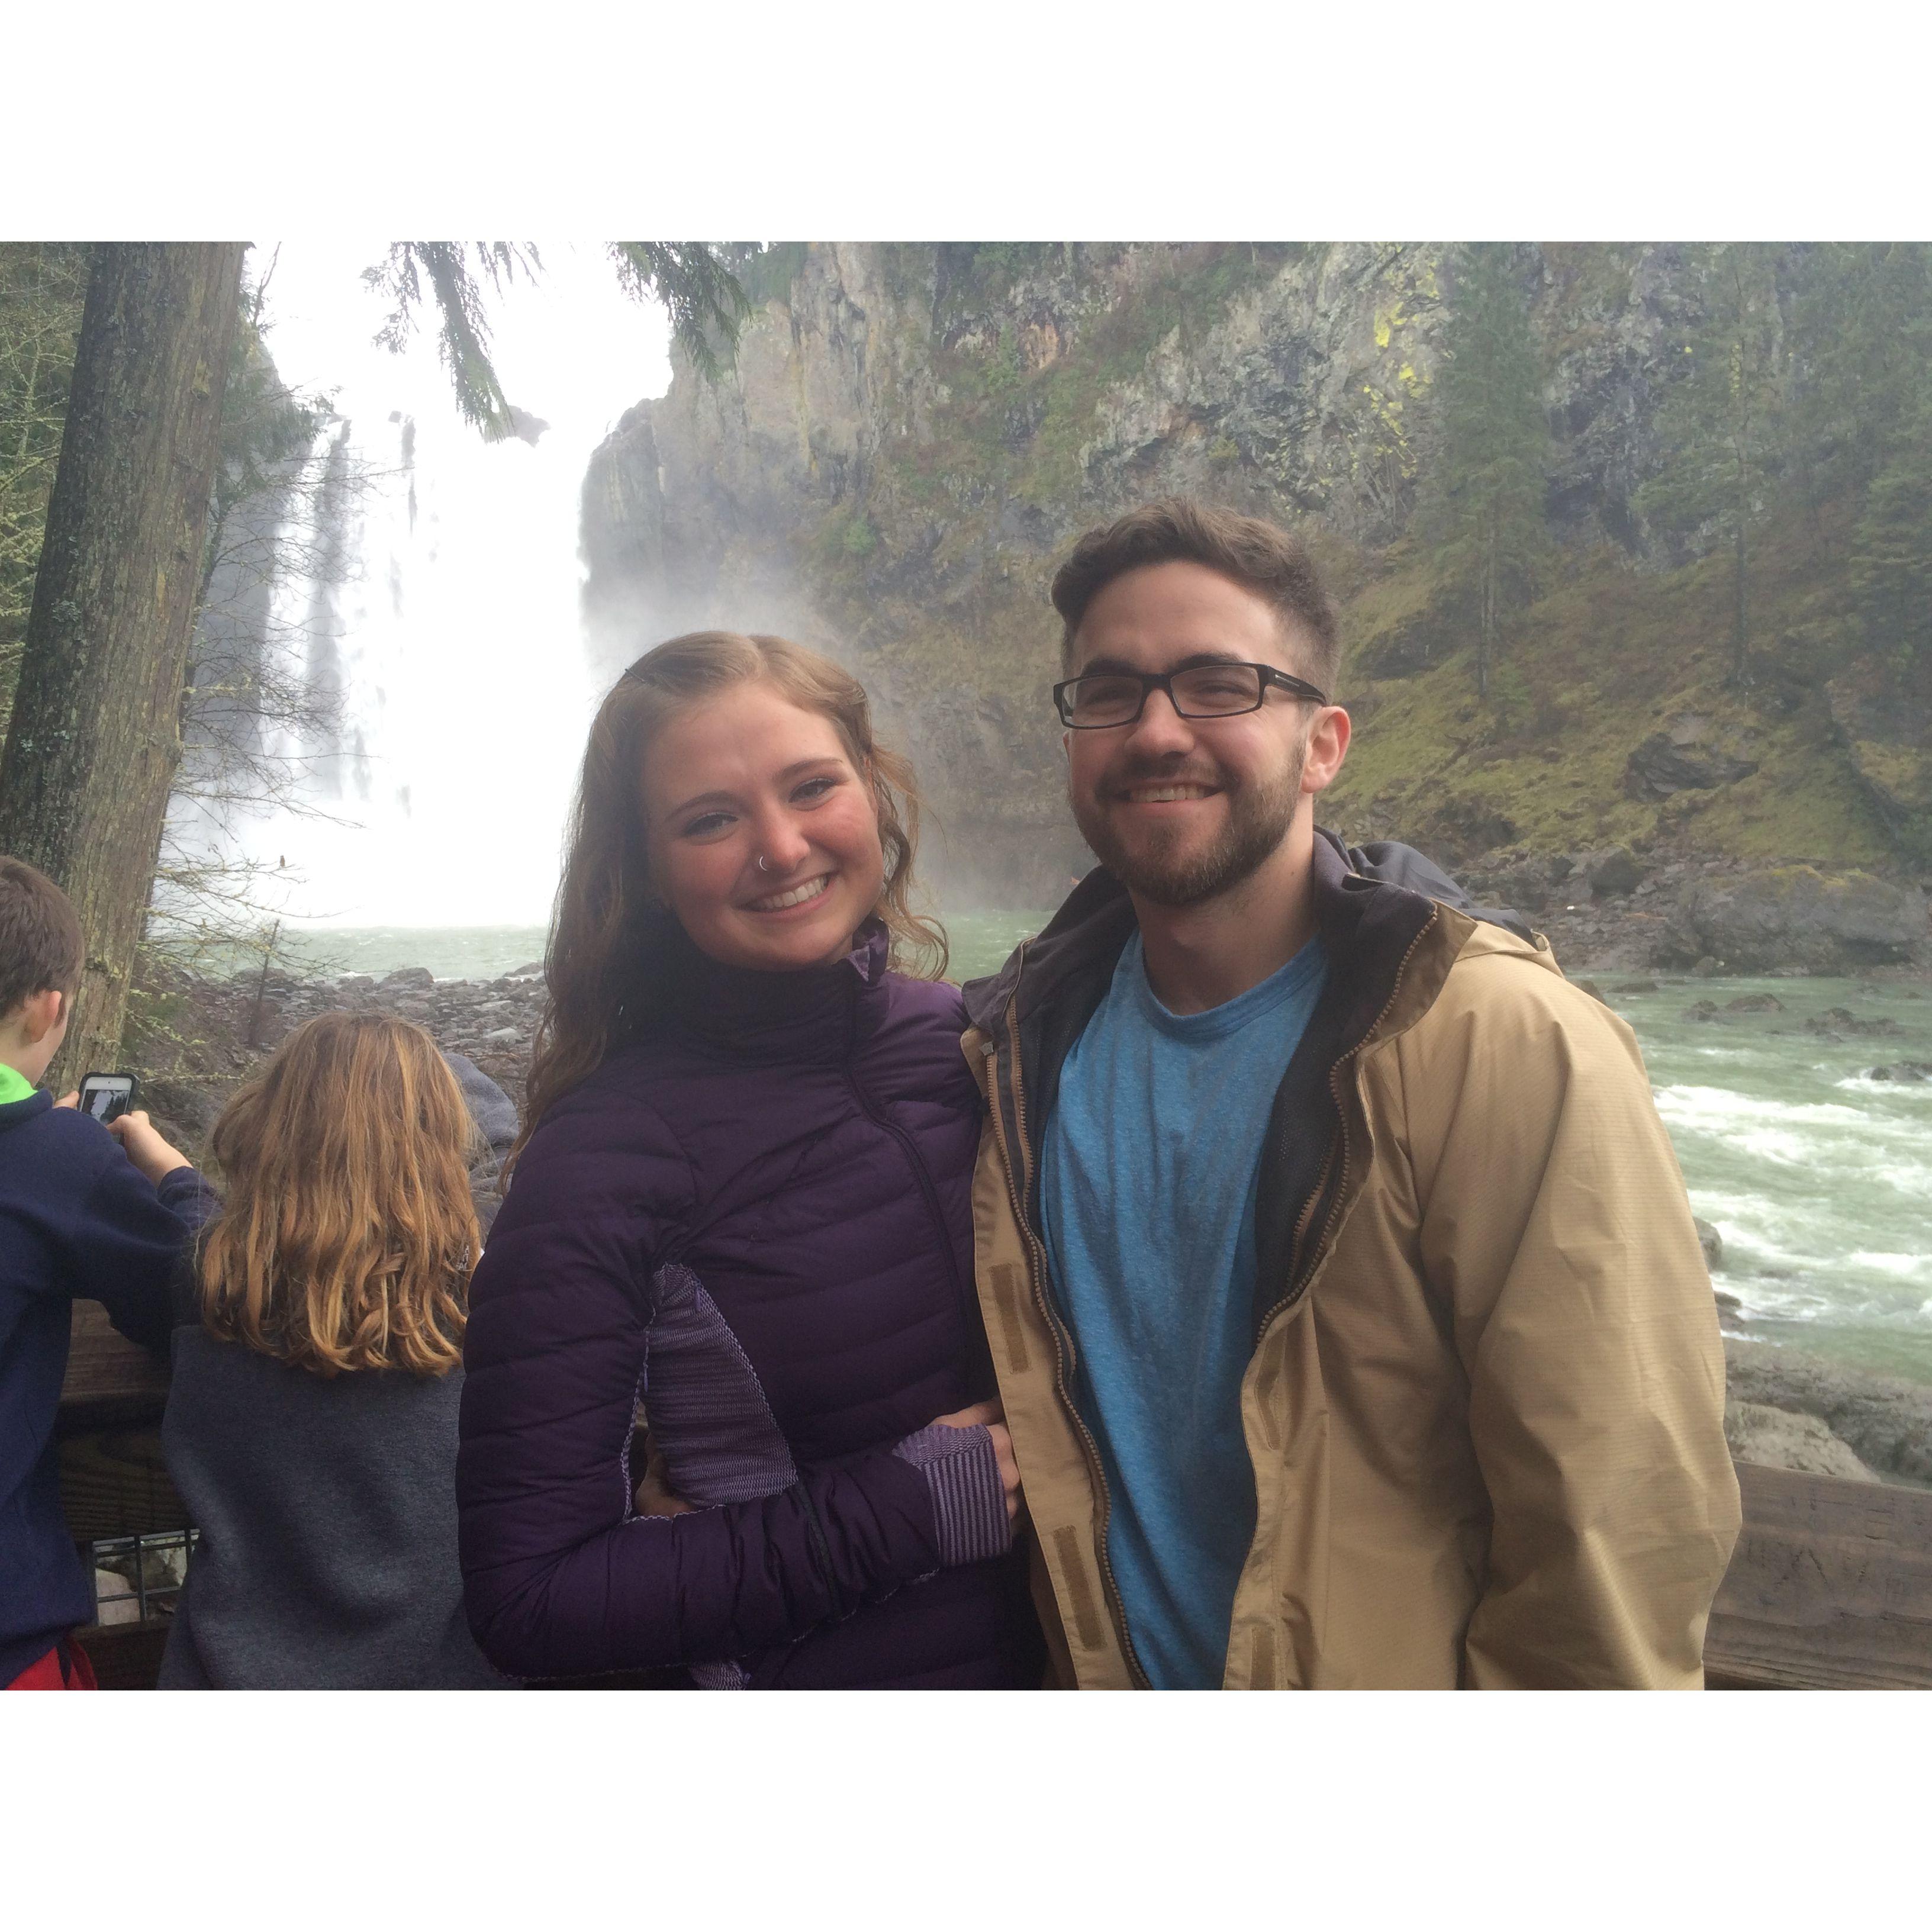 Our first Valentines Day together. Kaleb planned a trip to Snoqualmie Falls, champagne and all, 2015